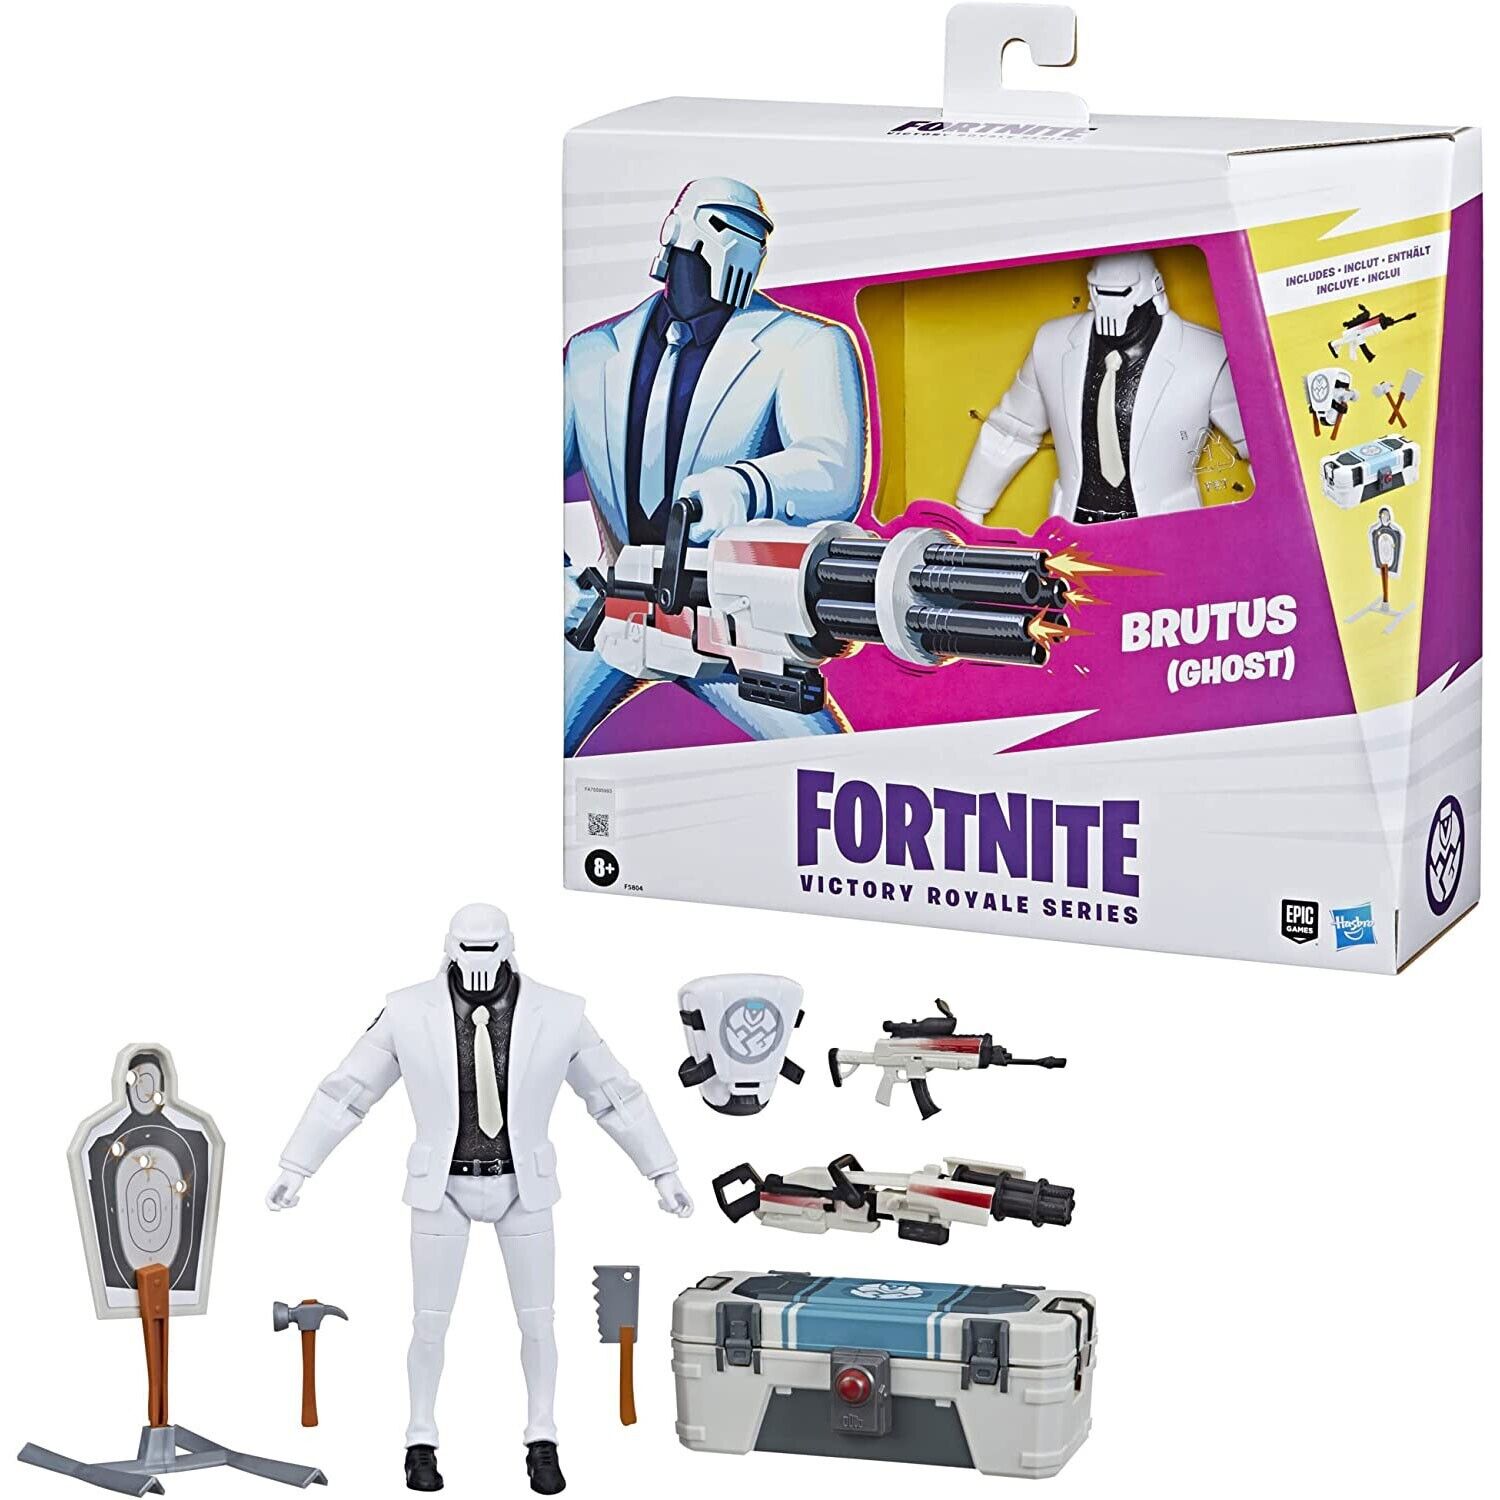 Fortnite Brutus (Ghost) Deluxe 6-Inch Action Figure - Victory Royale Series